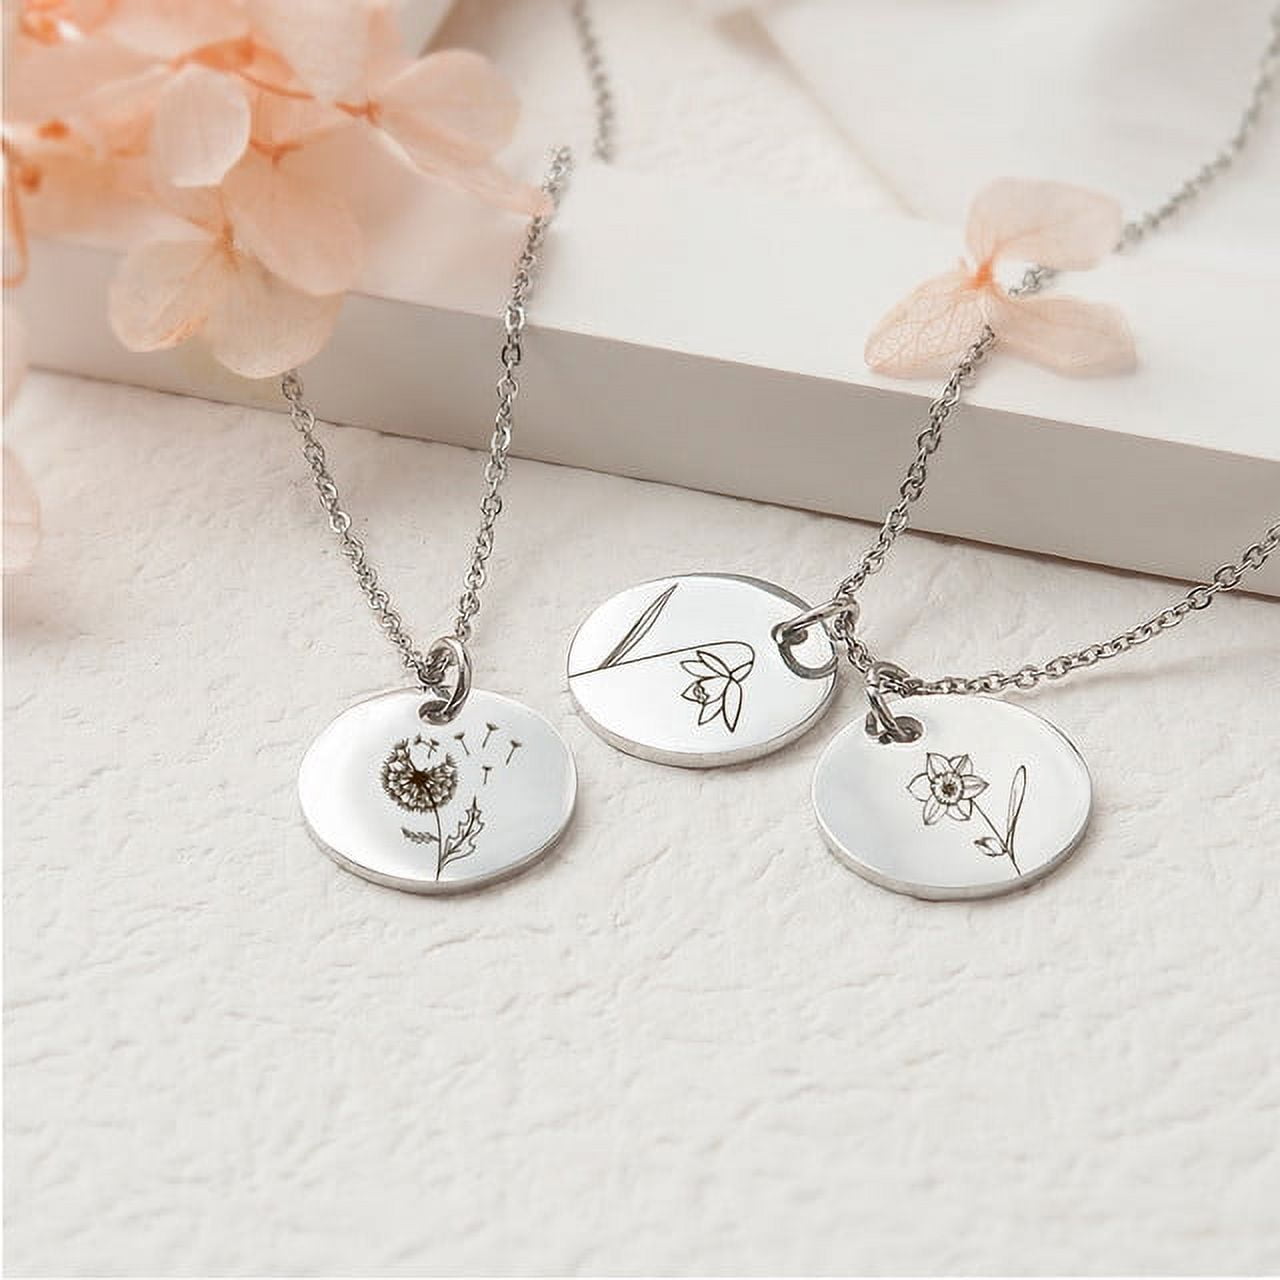 Personalized Necklace - Top Rated Store, Learn More